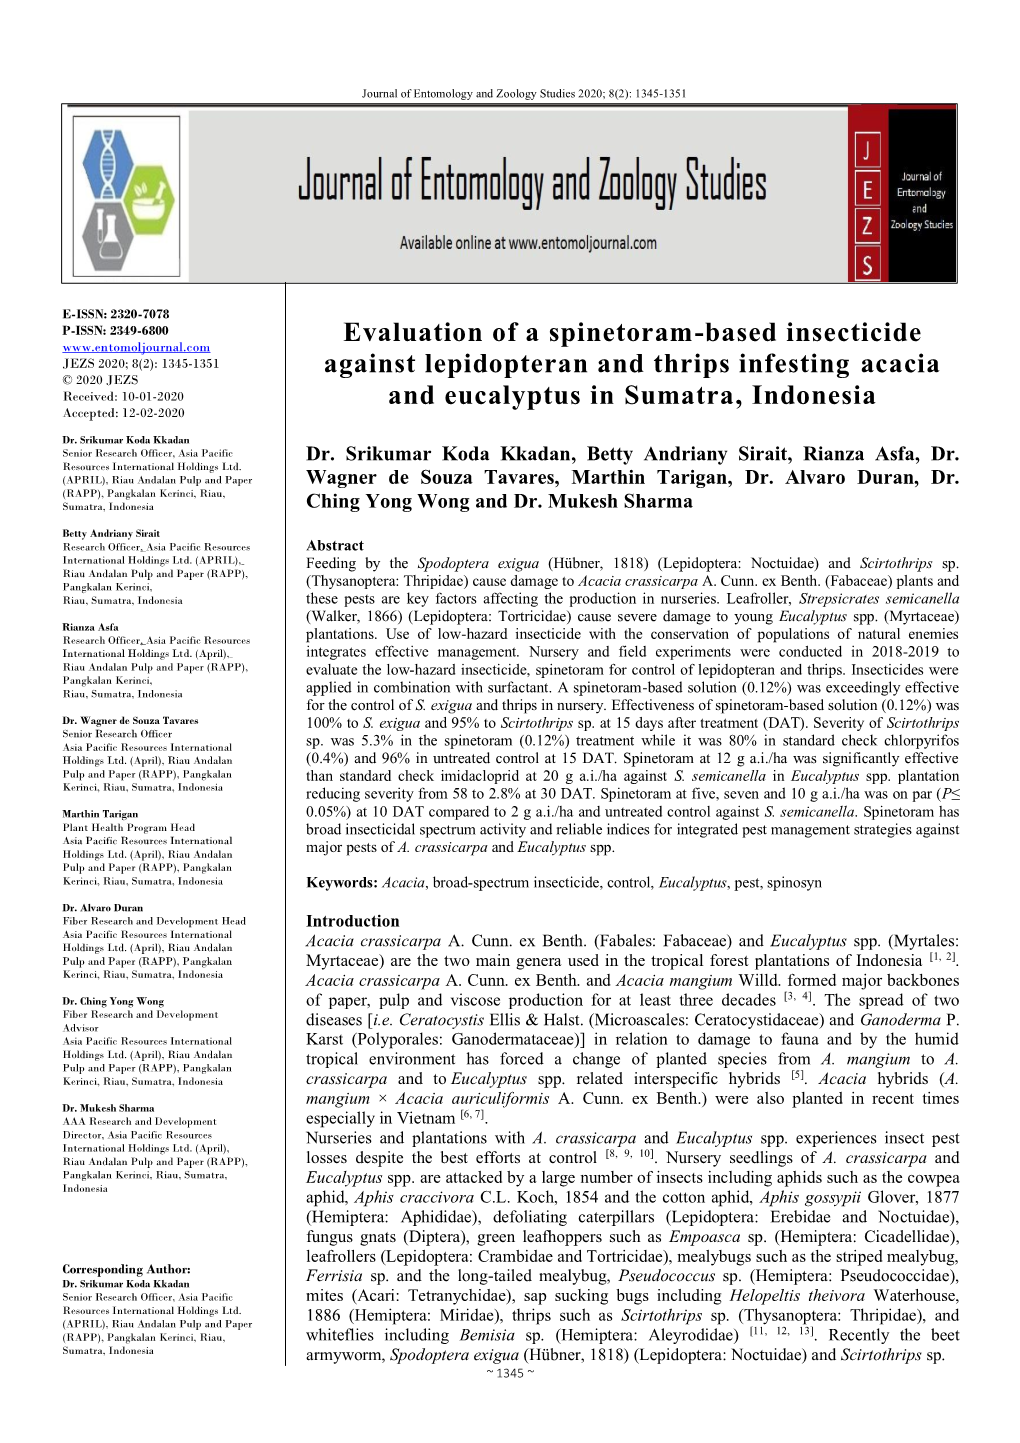 Evaluation of a Spinetoram-Based Insecticide Against Lepidopteran and Thrips Infesting Acacia and Eucalyptus in Sumatra, Indones